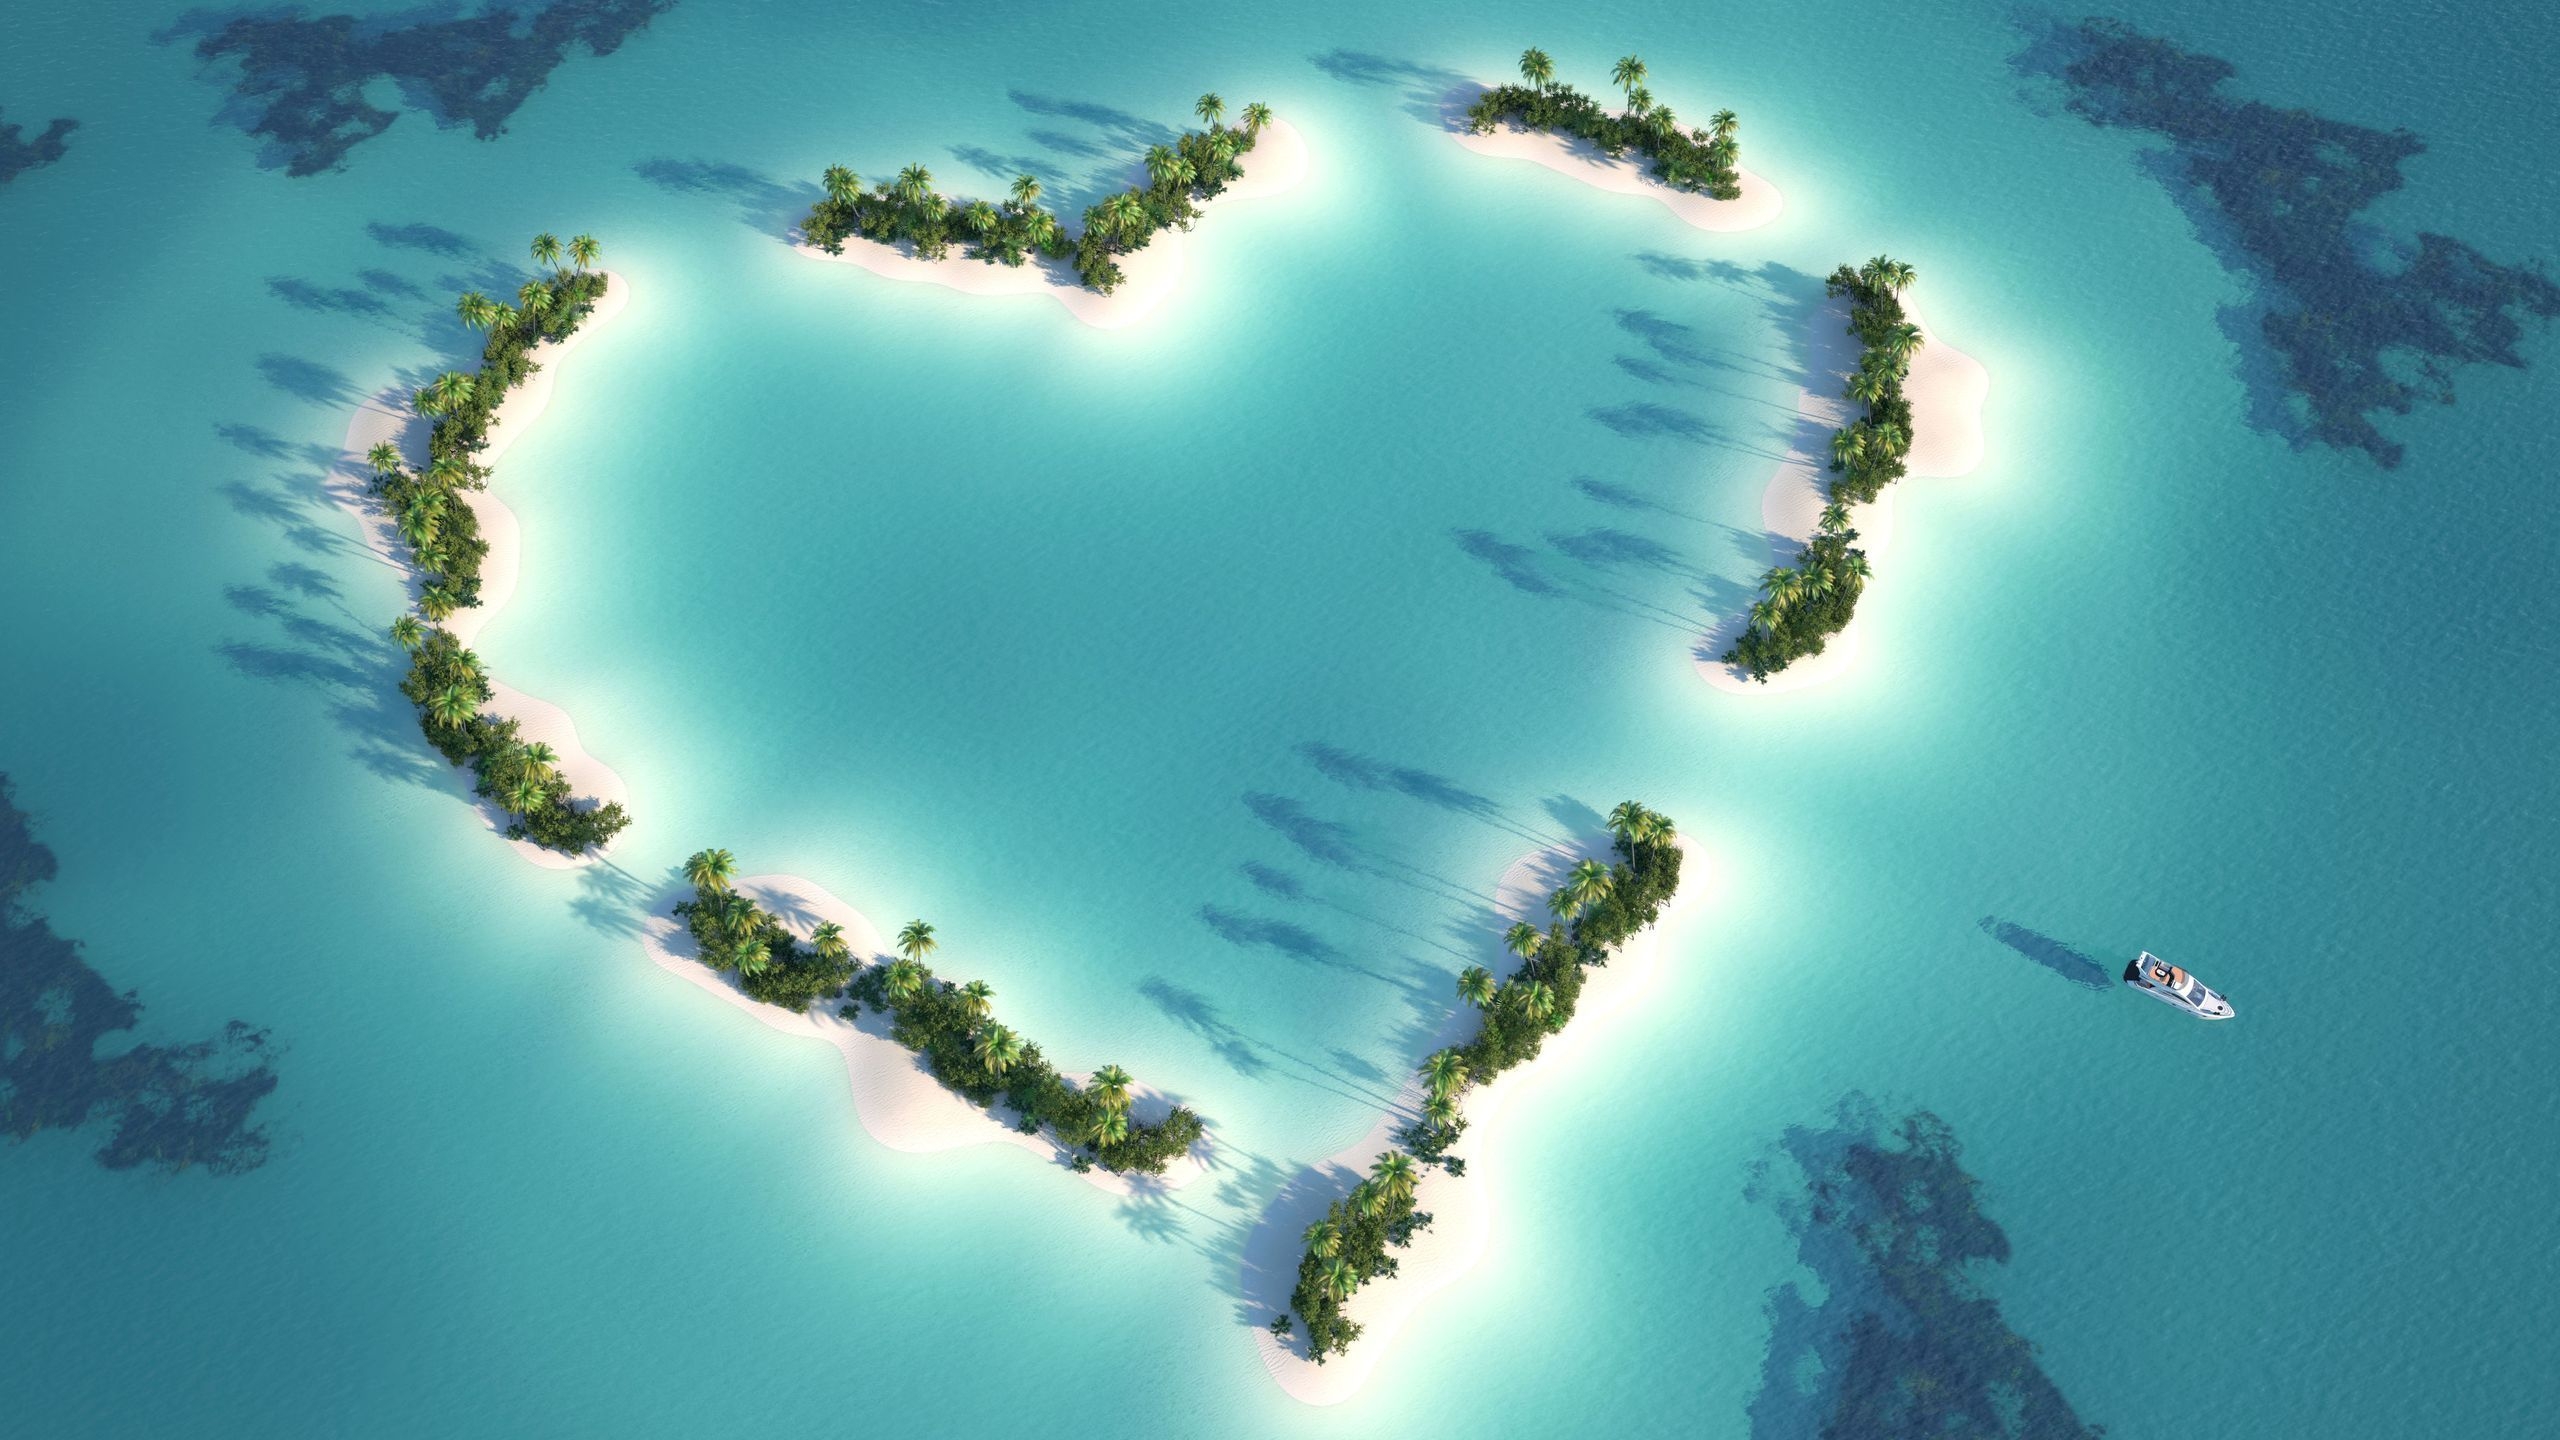 The Love Island for 2560x1440 HDTV resolution